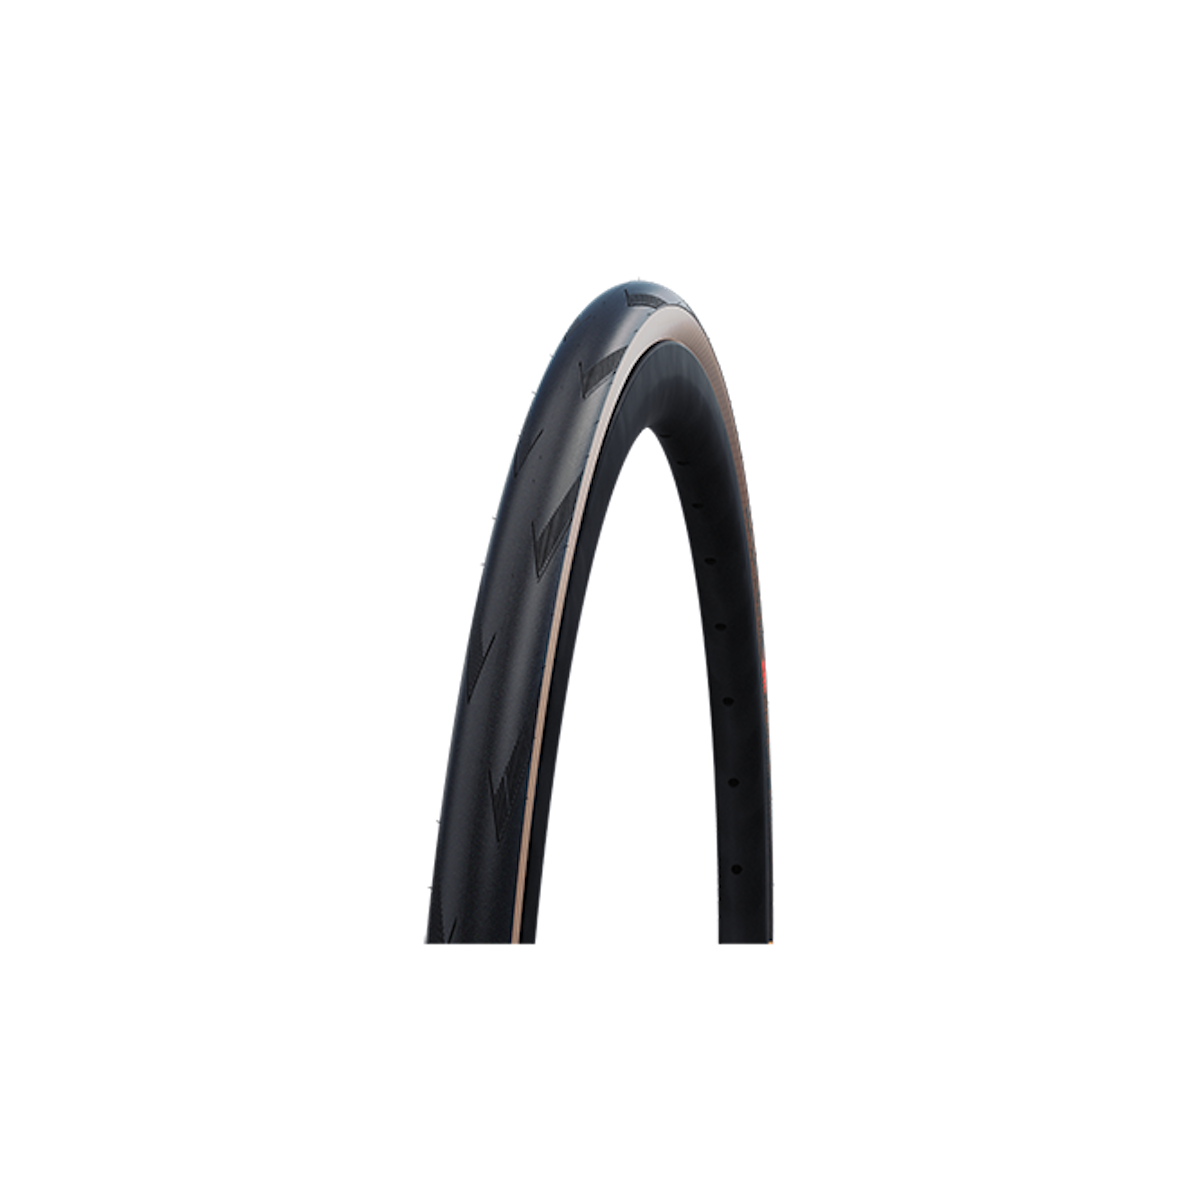 SCHWALBE PRO ONE 700 x 28C tubeless tyre